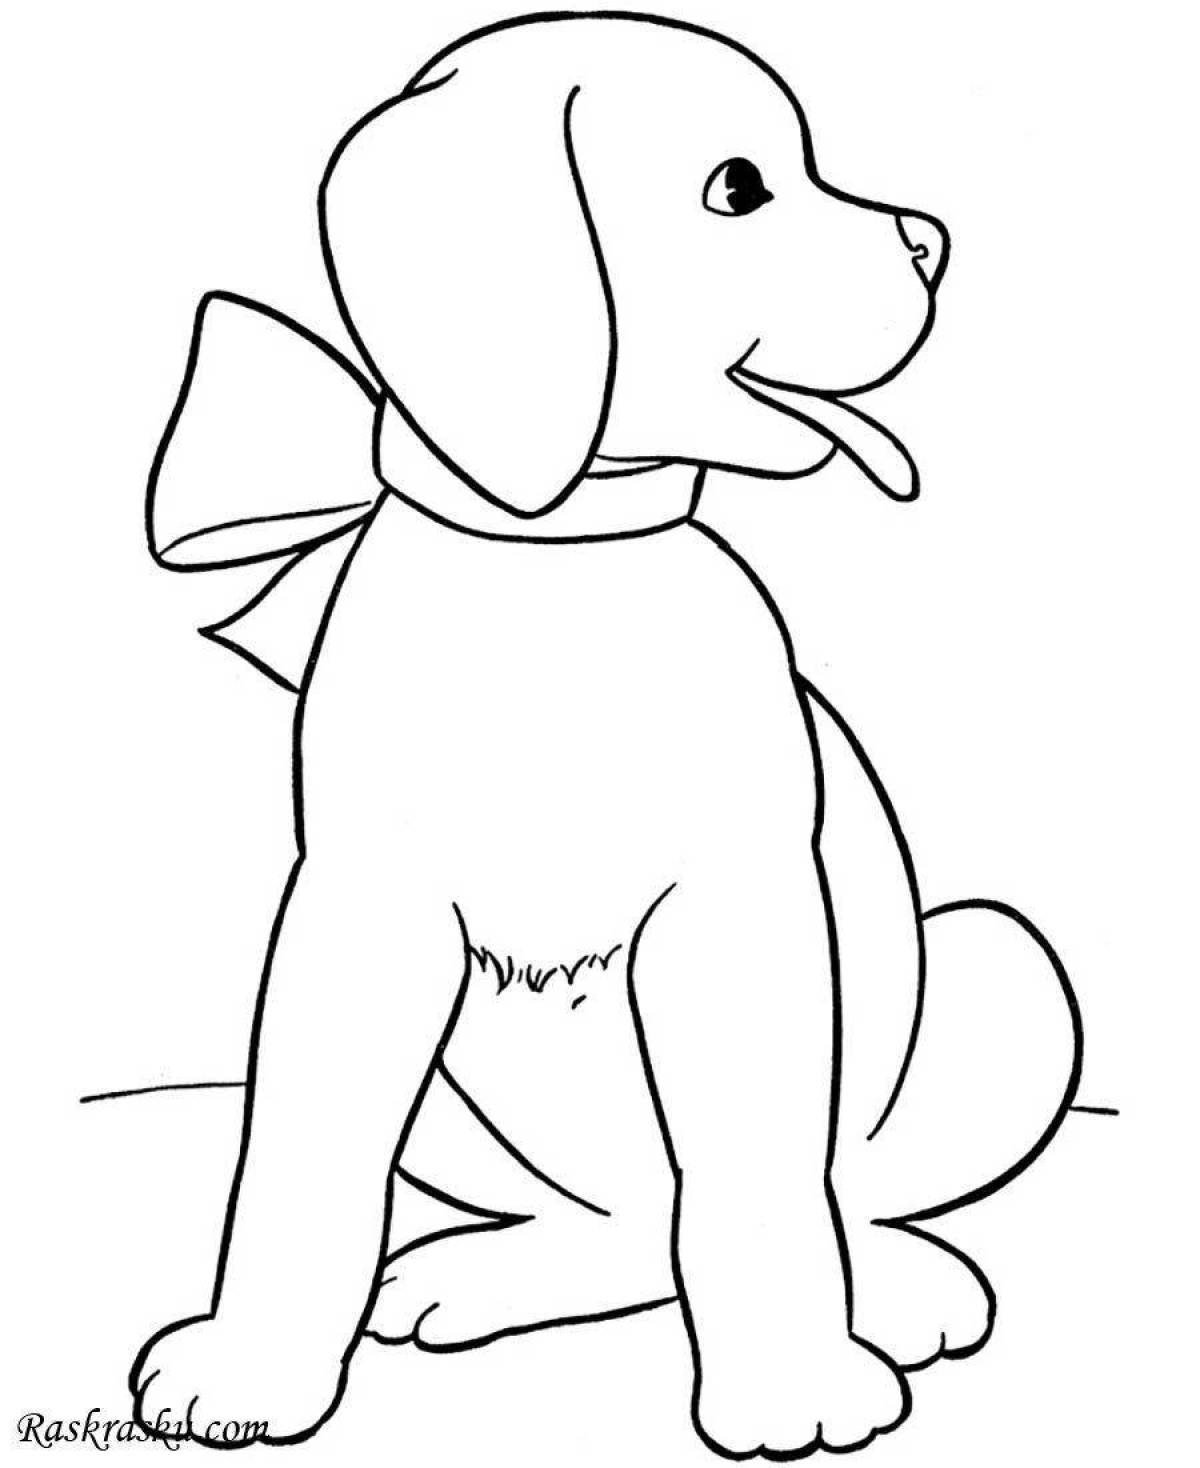 Great dog coloring book for 3-4 year olds